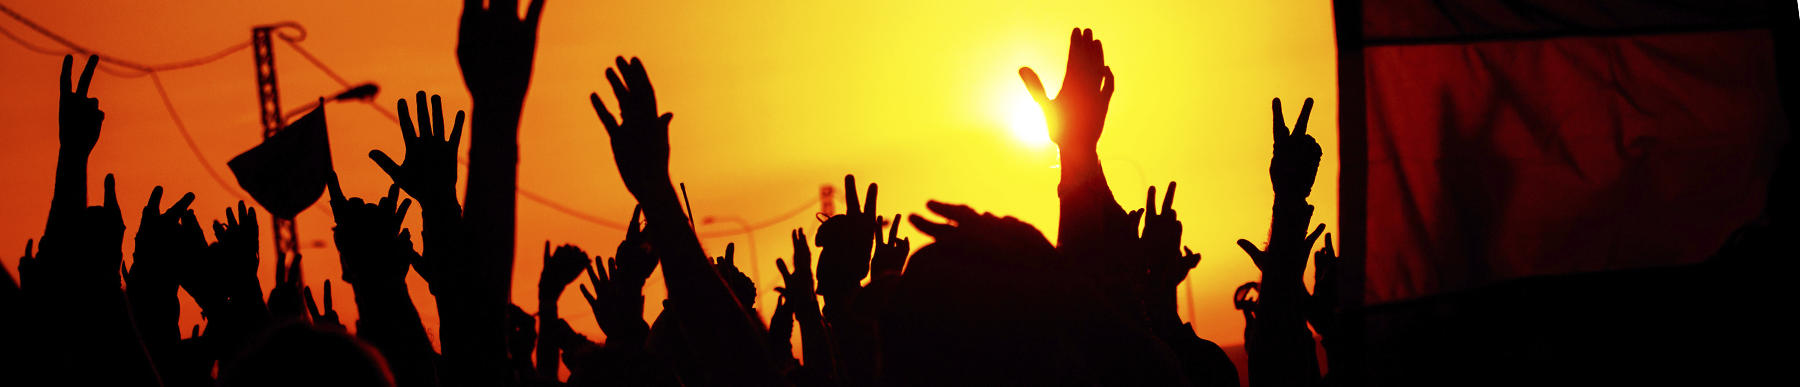 people with their hands in the air over a sunset